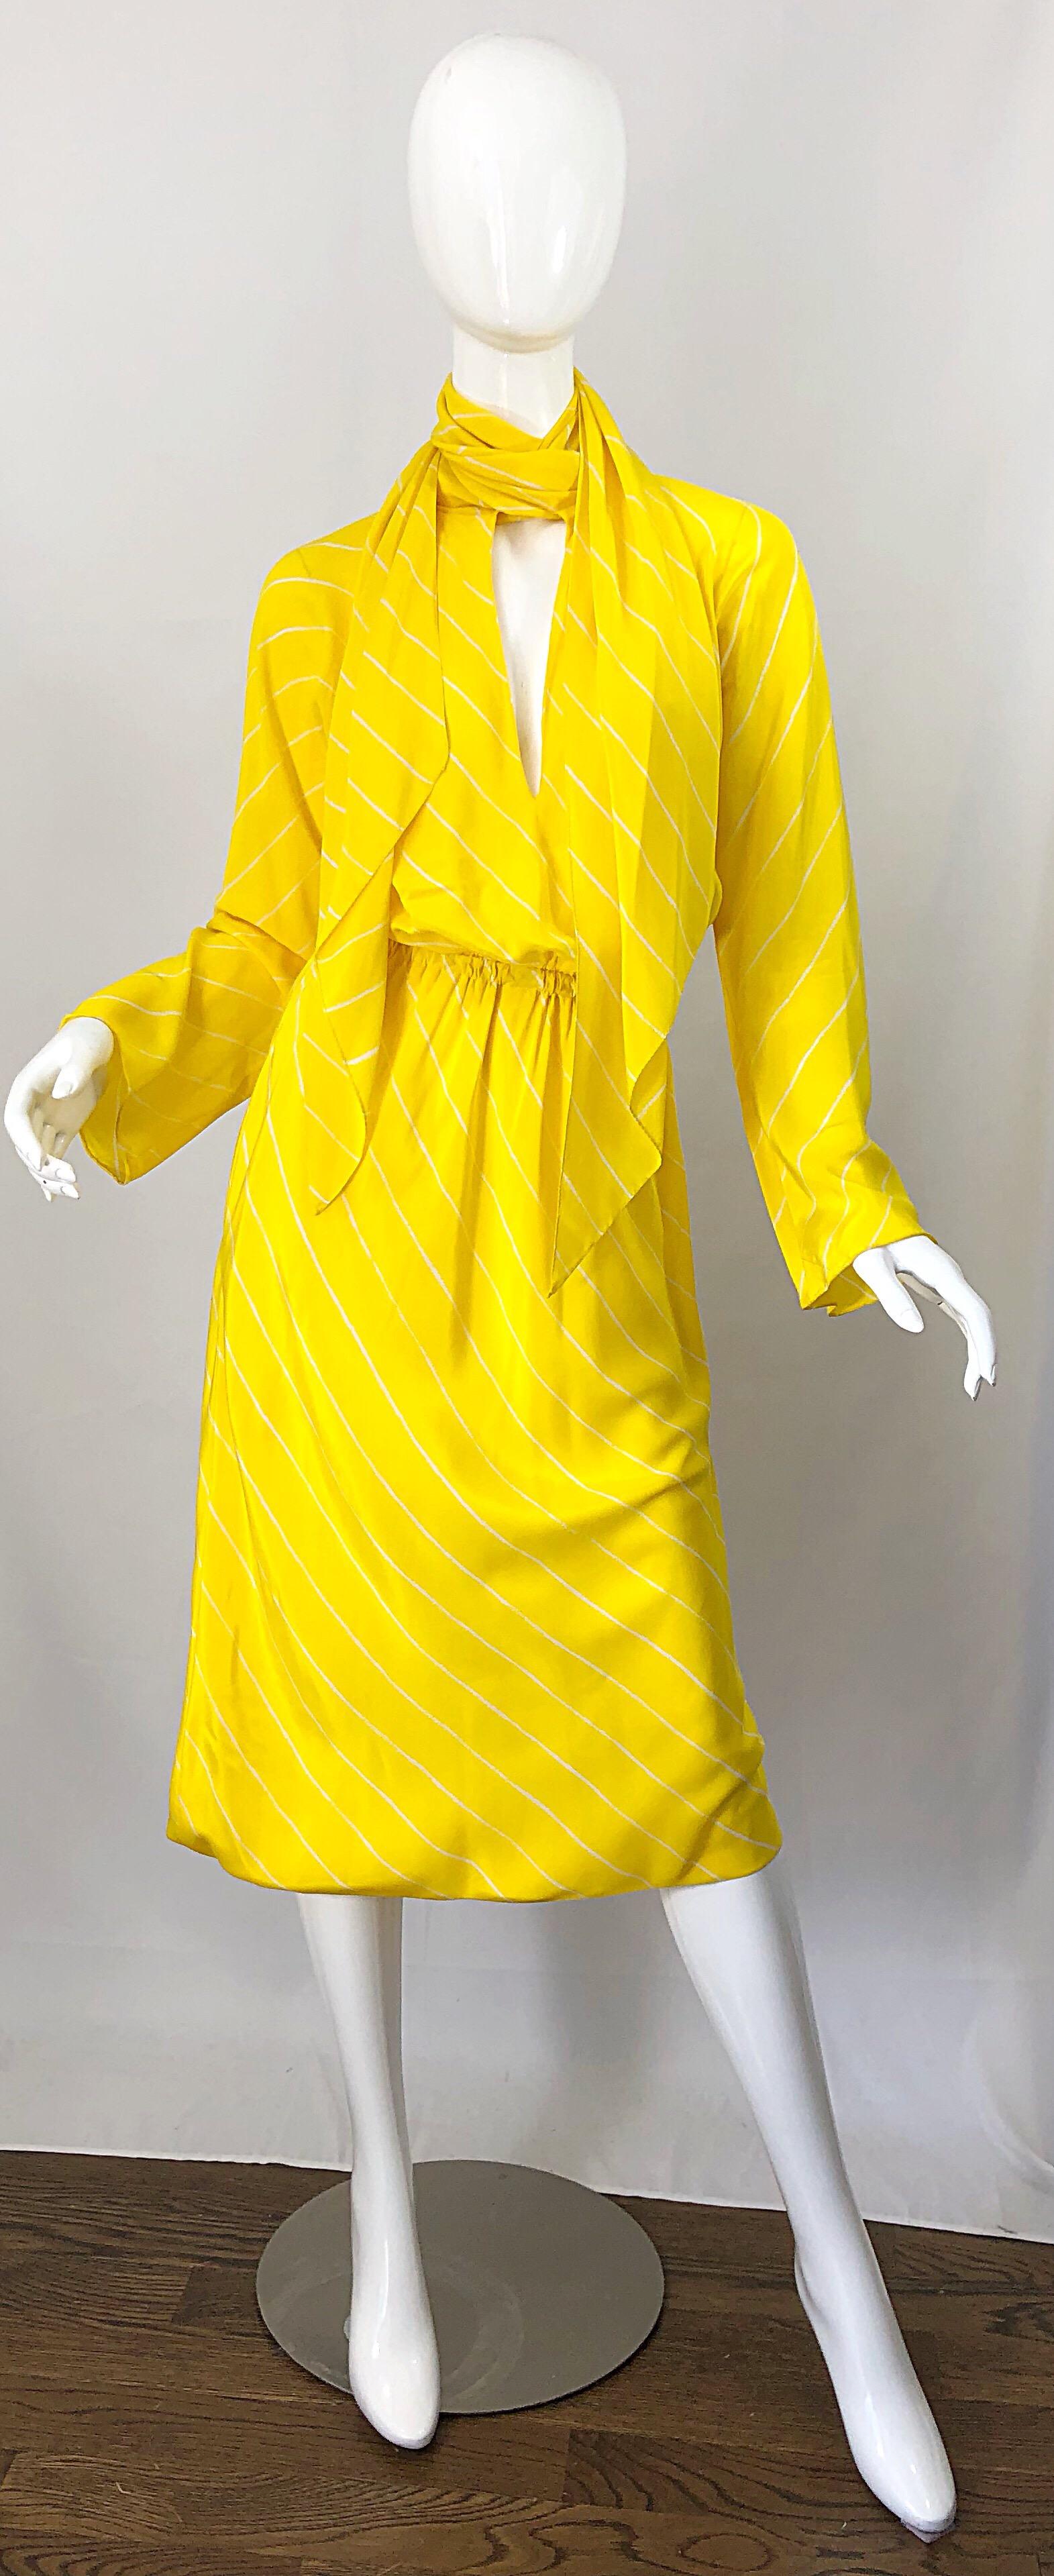 1970s Halston Canary Yellow + White Chevron Striped Bell Sleeve 70s Scarf Dress 8